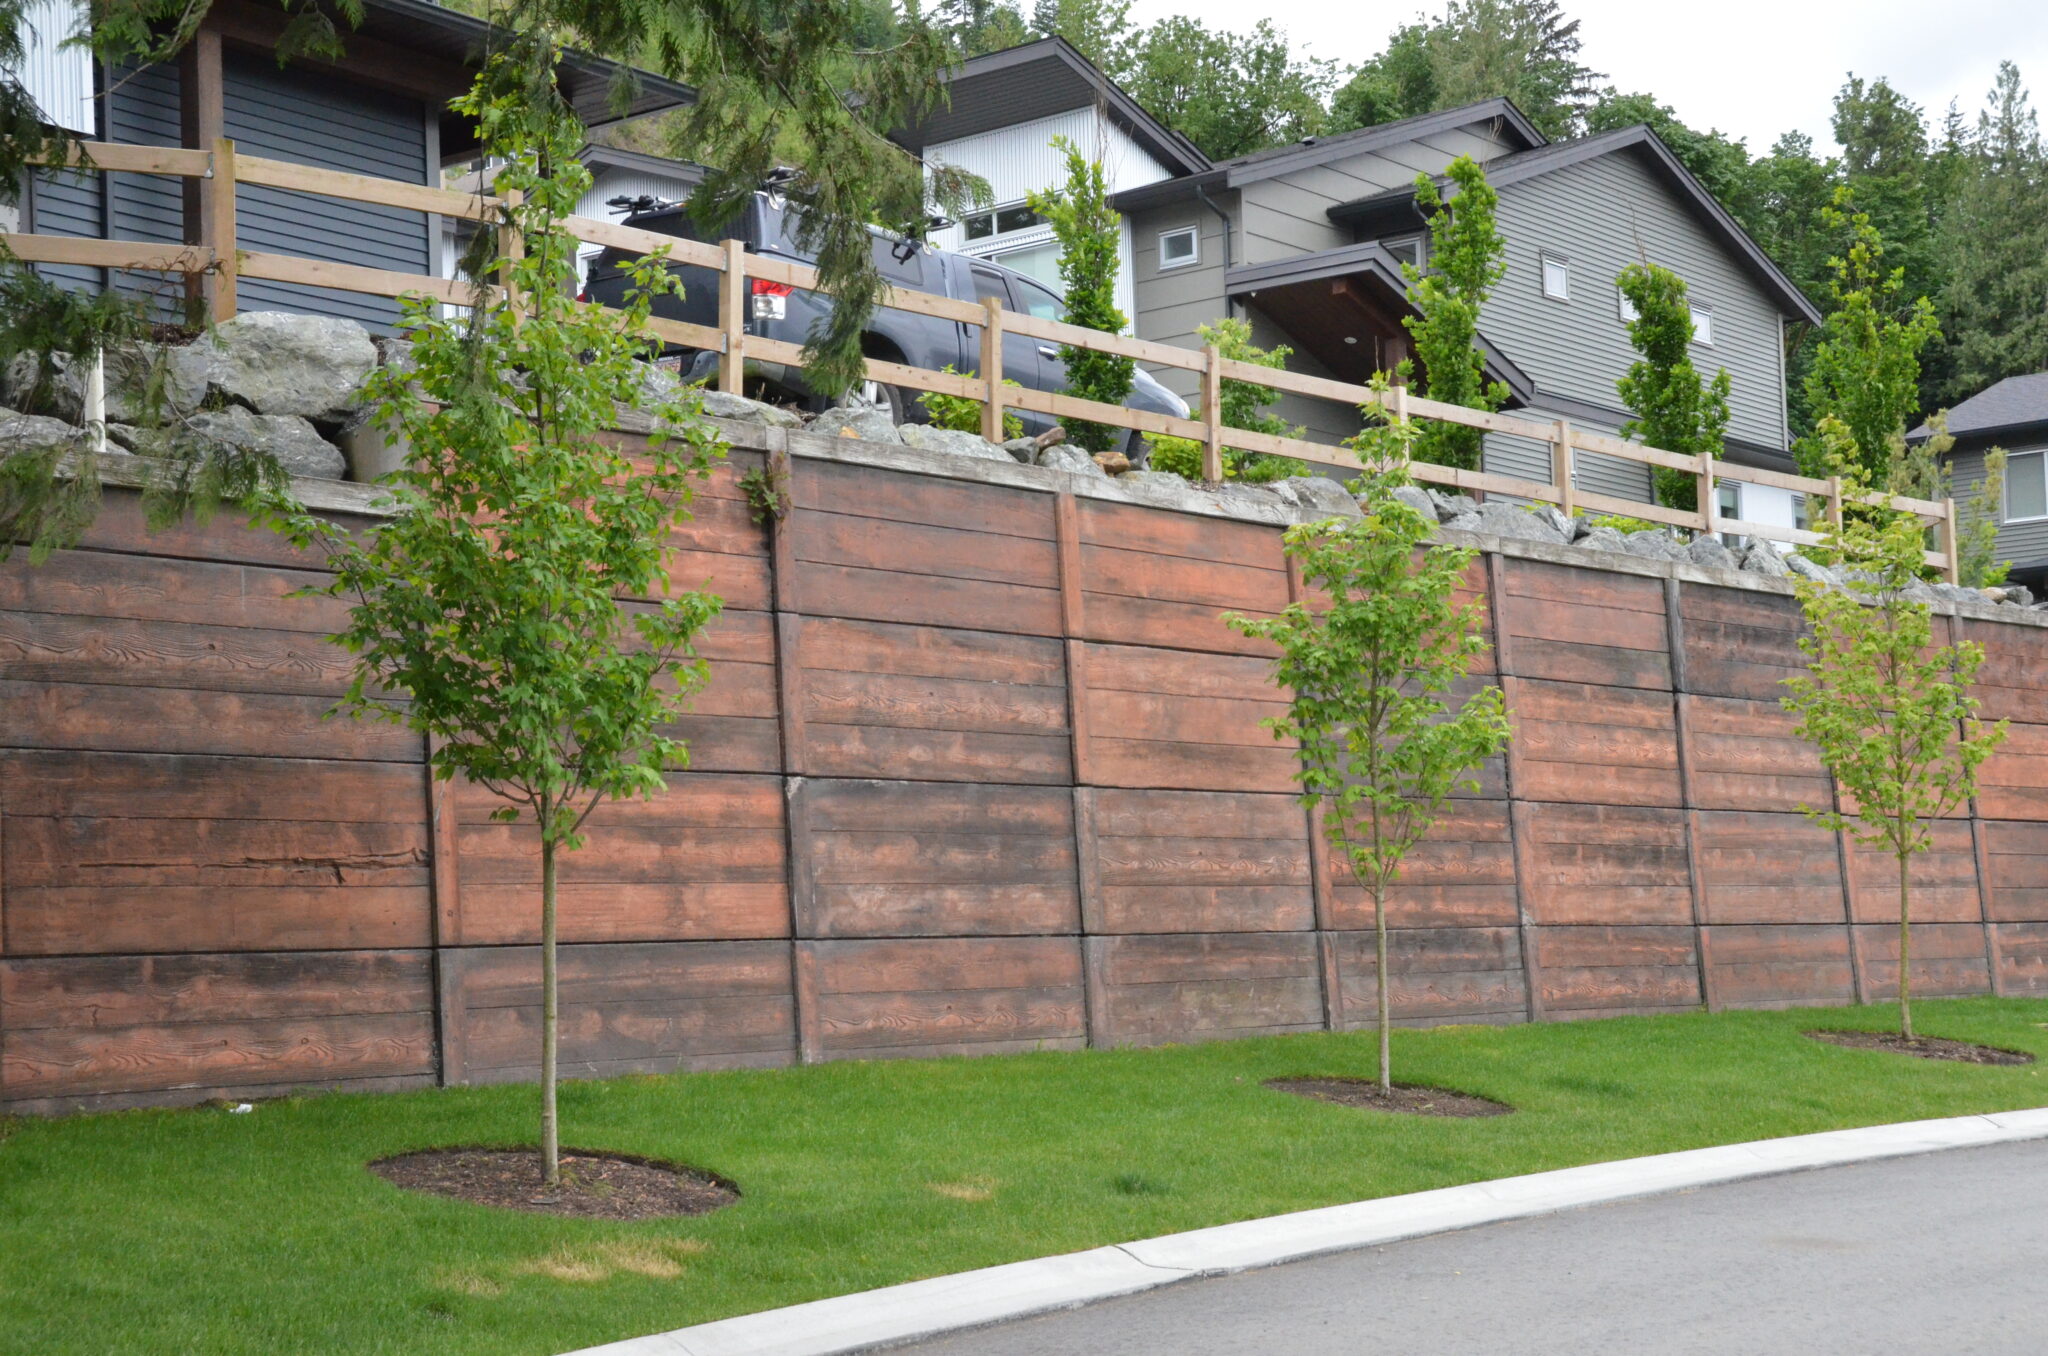 Retaining Wall Allowed for Townhome Community To Be Built